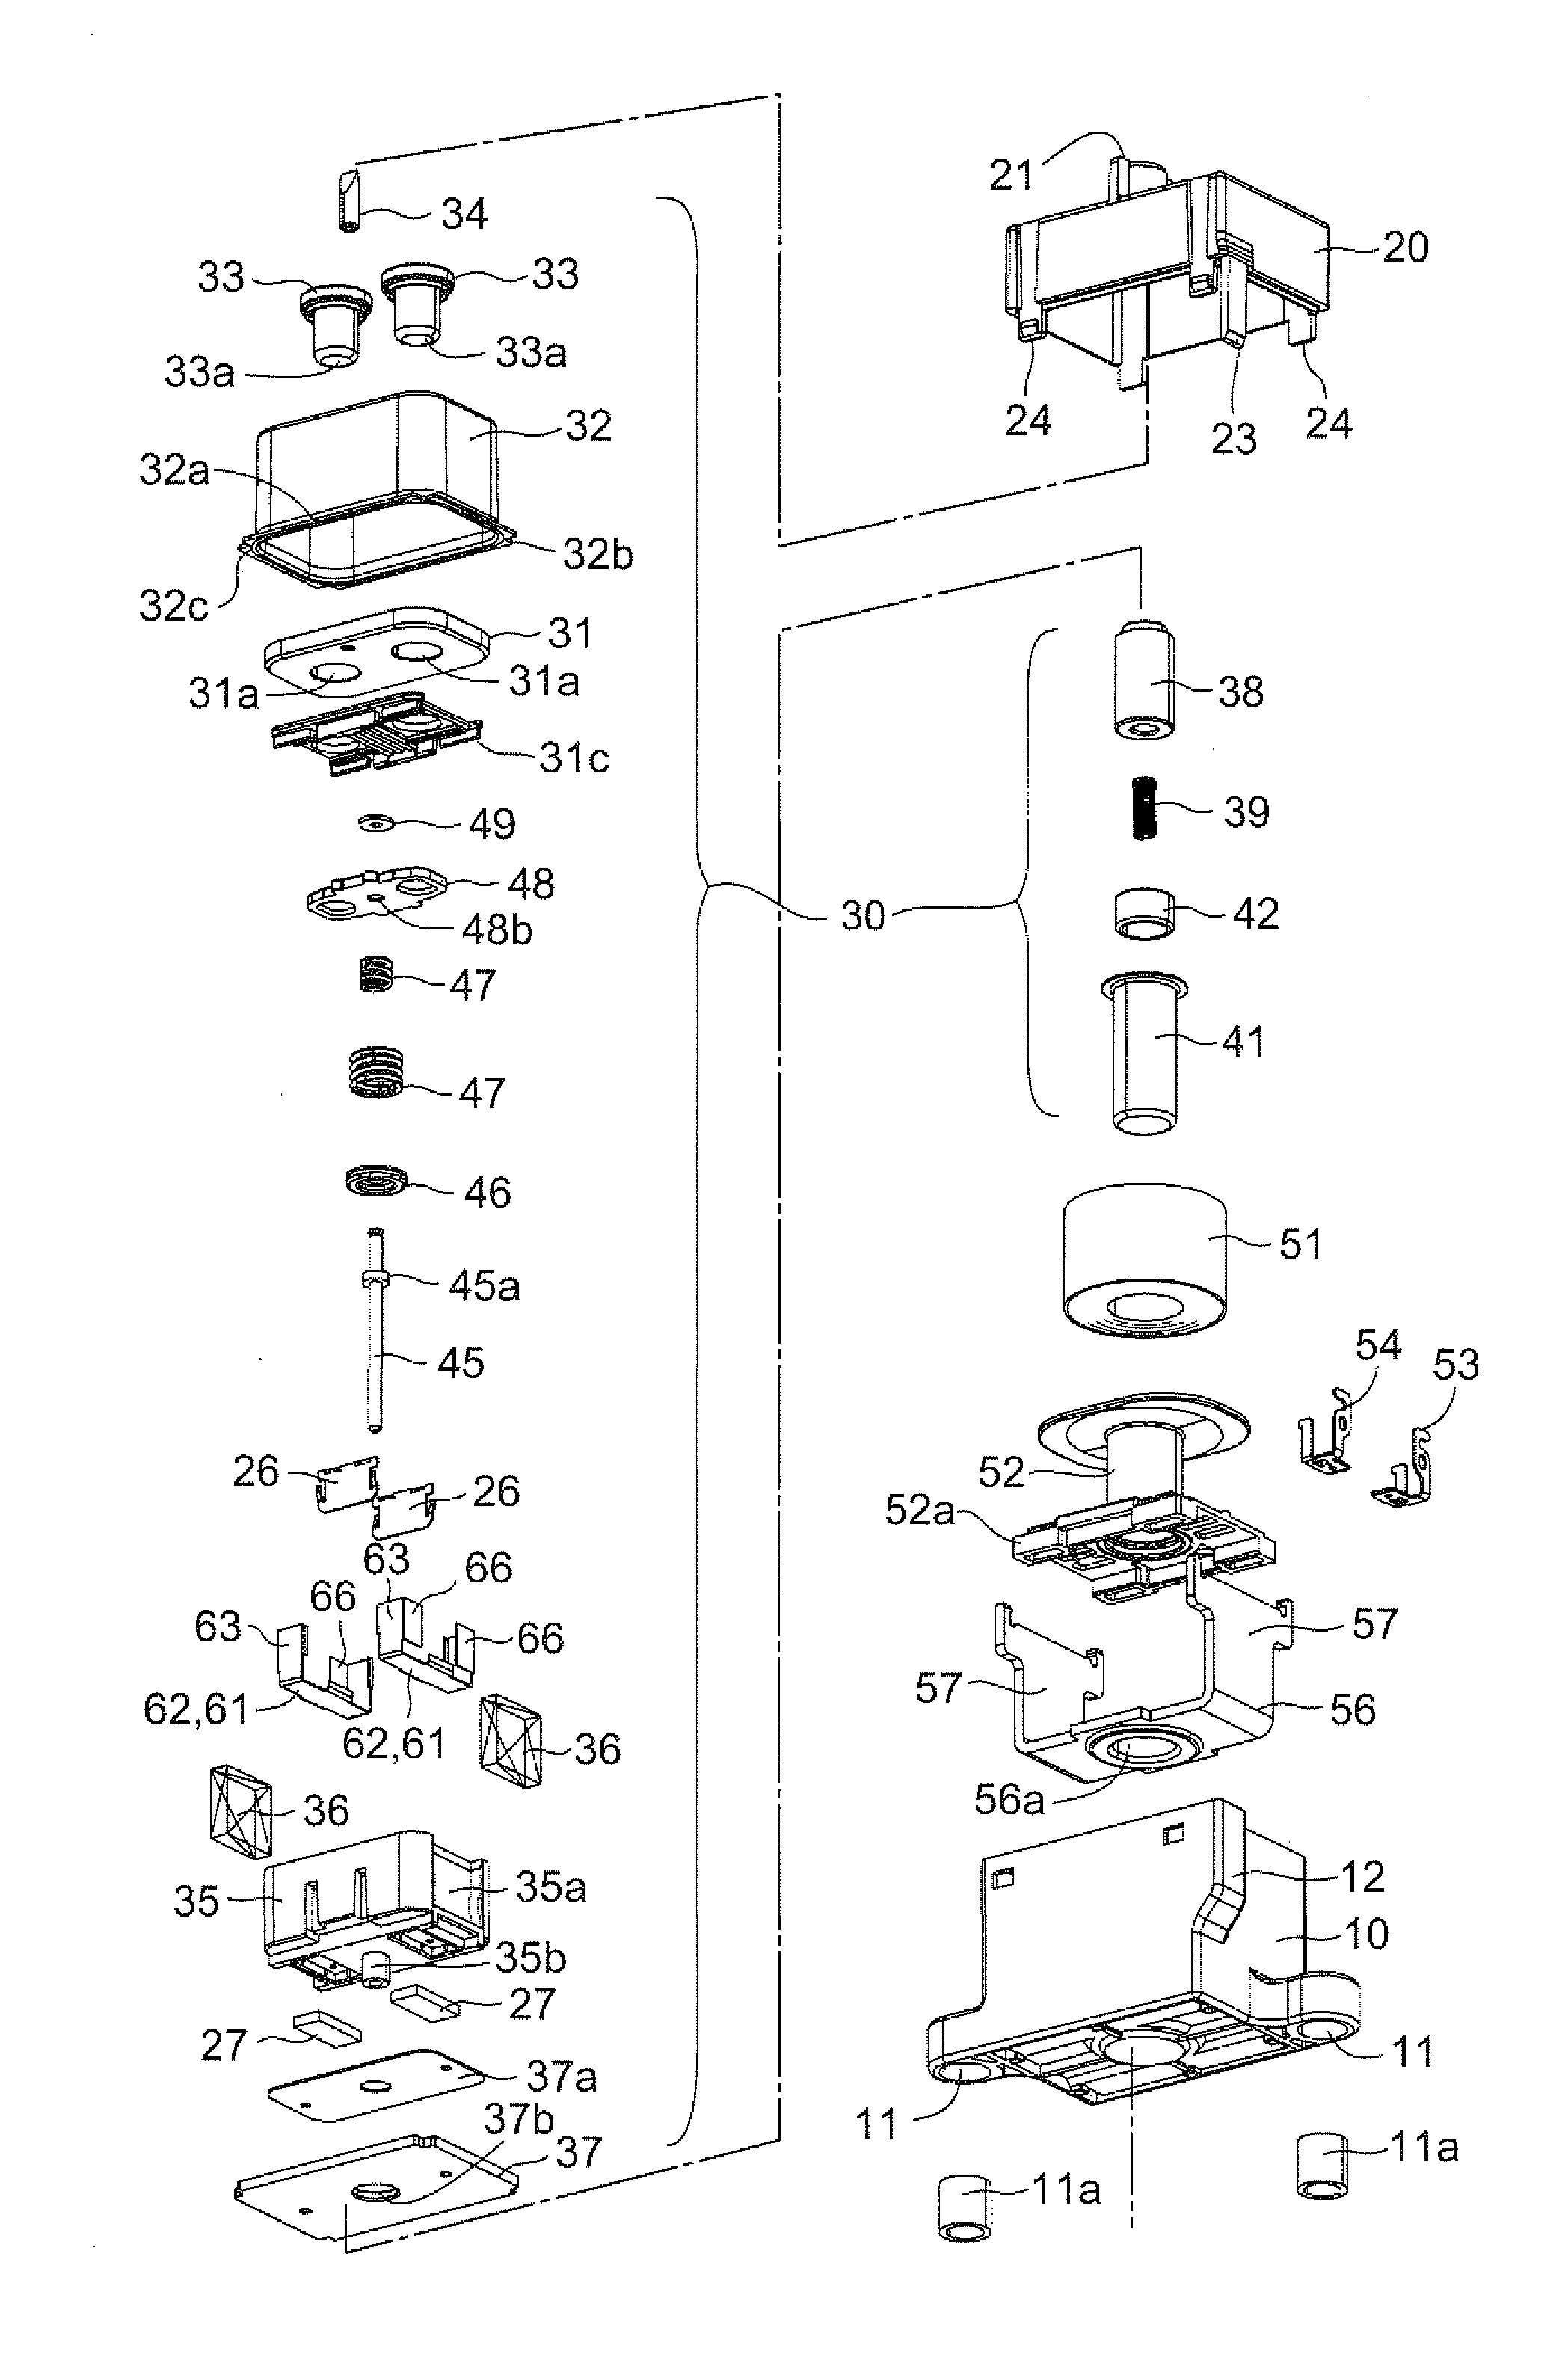 Sealed contact device